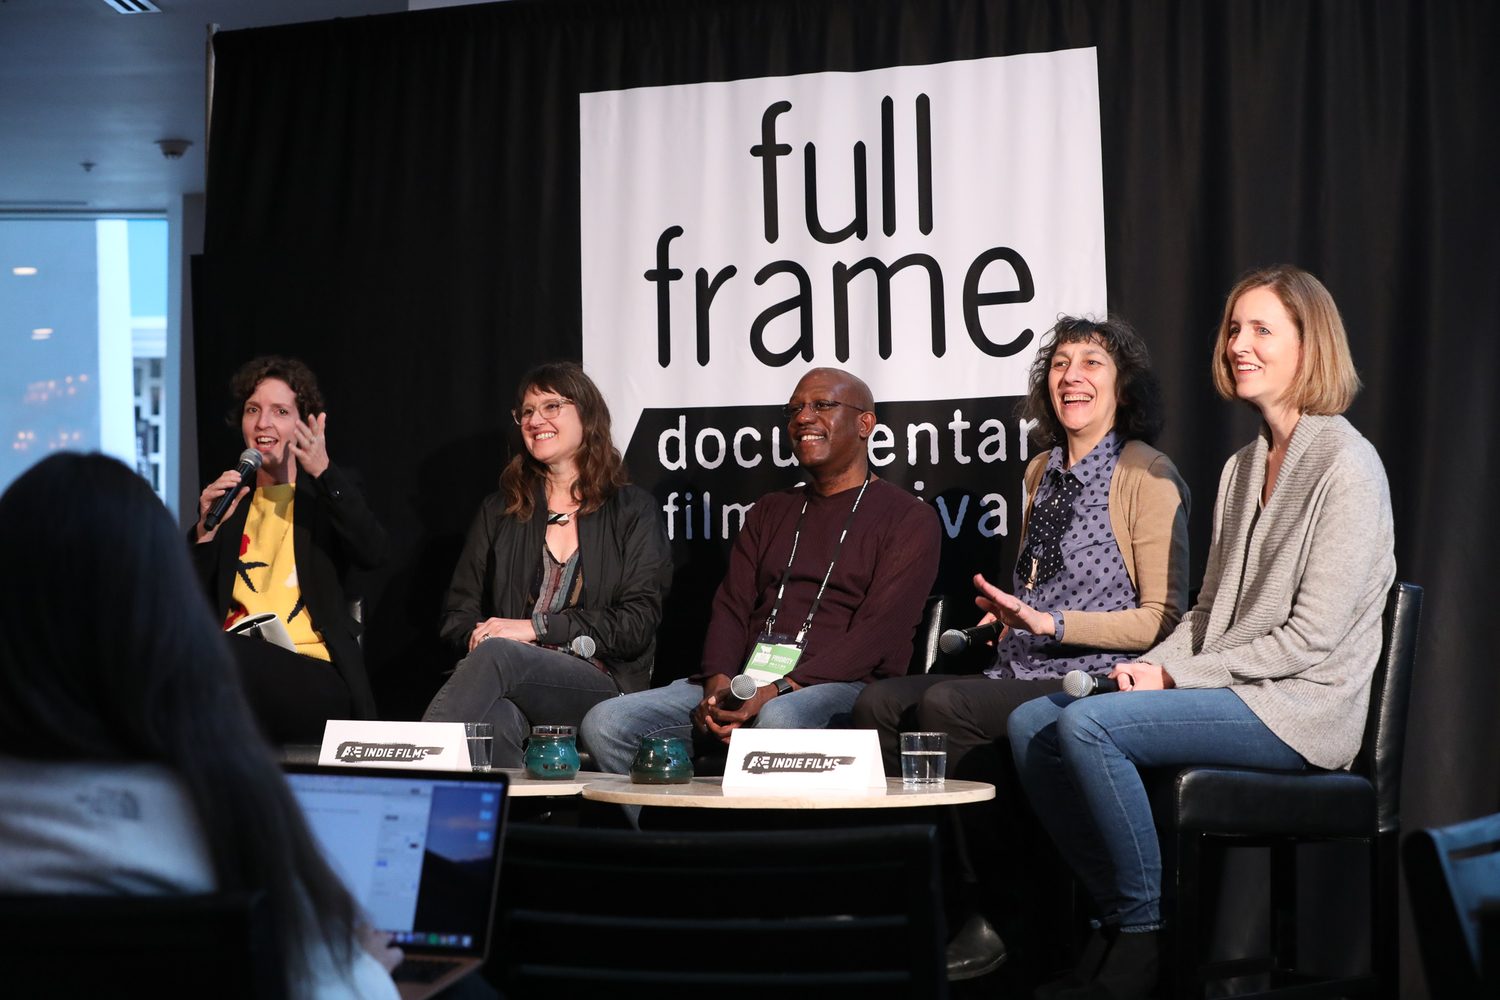 The "Southern Sustainability" panel at Full Frame's A&E IndieFilms Speakeasy. Left to right: Moderator Dana Merwin, IDA; Rachel Raney, UNC-TV; Eric Johnson, Trailblazer Studios; Naomi Walker, Southern Documentary Fund; Susan Ellis, Footpath Pictures. Courtesy of Full Frame Documentary Film Festival